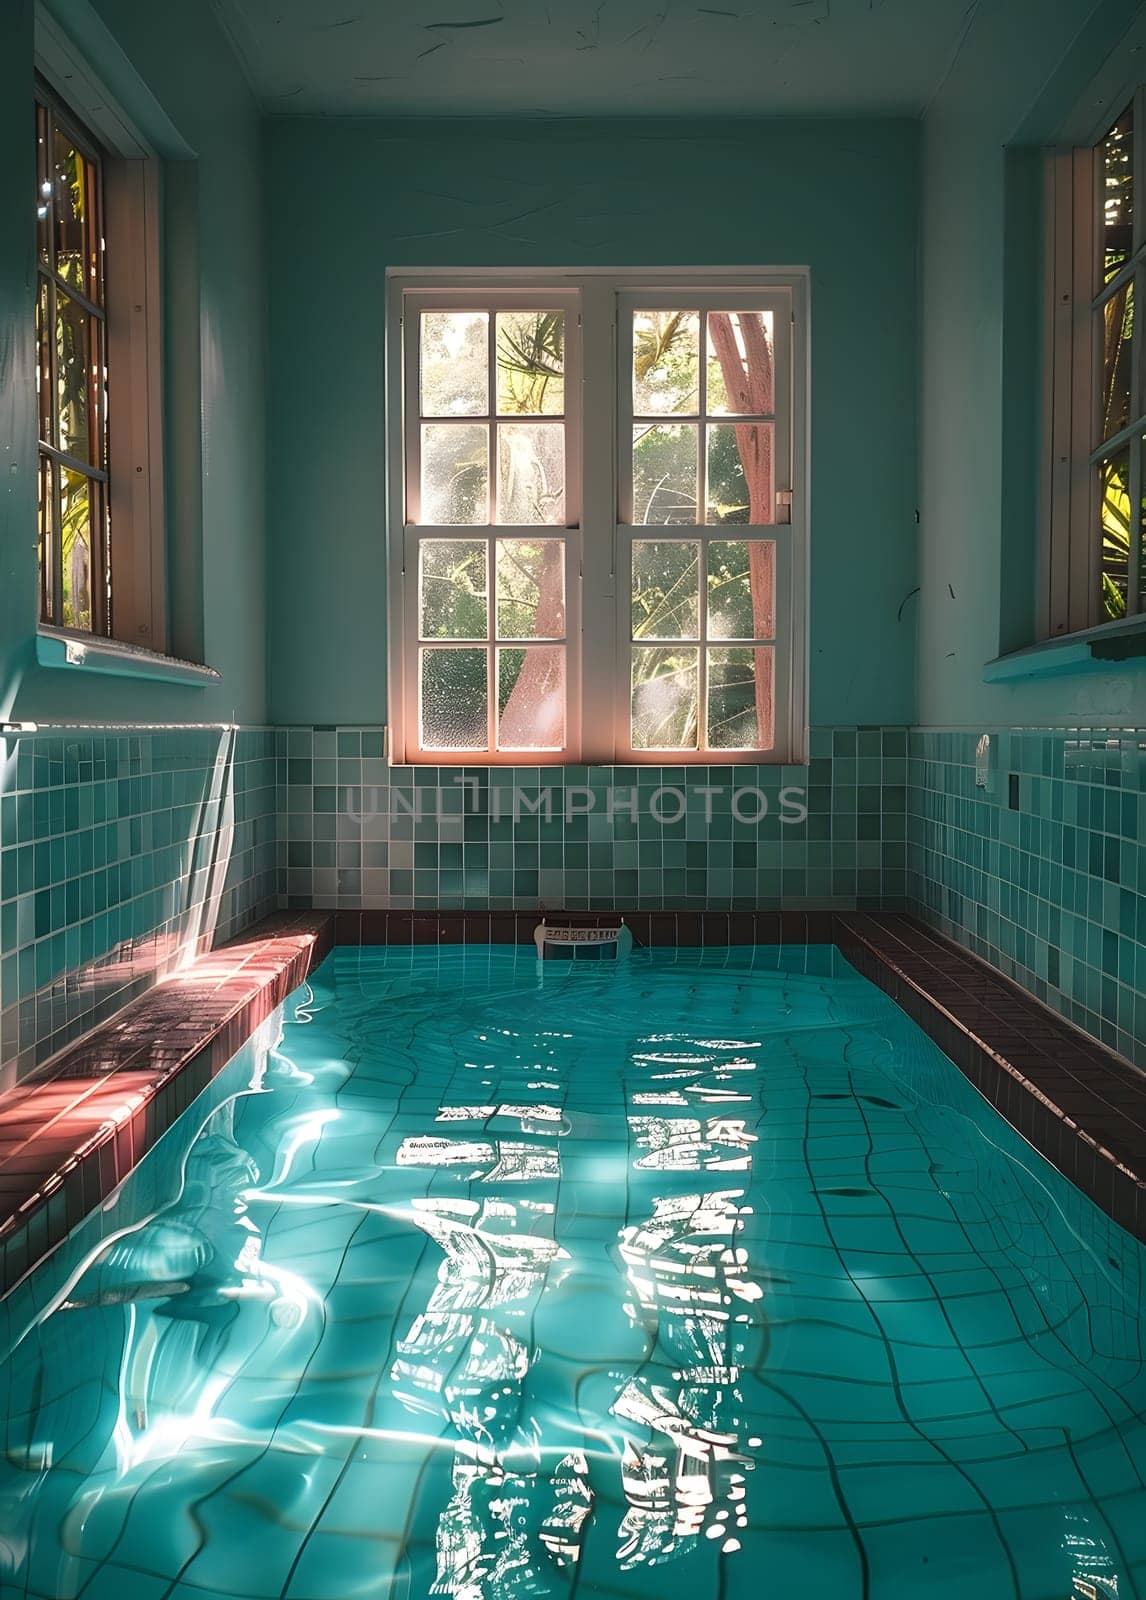 Rectangular indoor pool with a window, perfect for recreational swimming by Nadtochiy